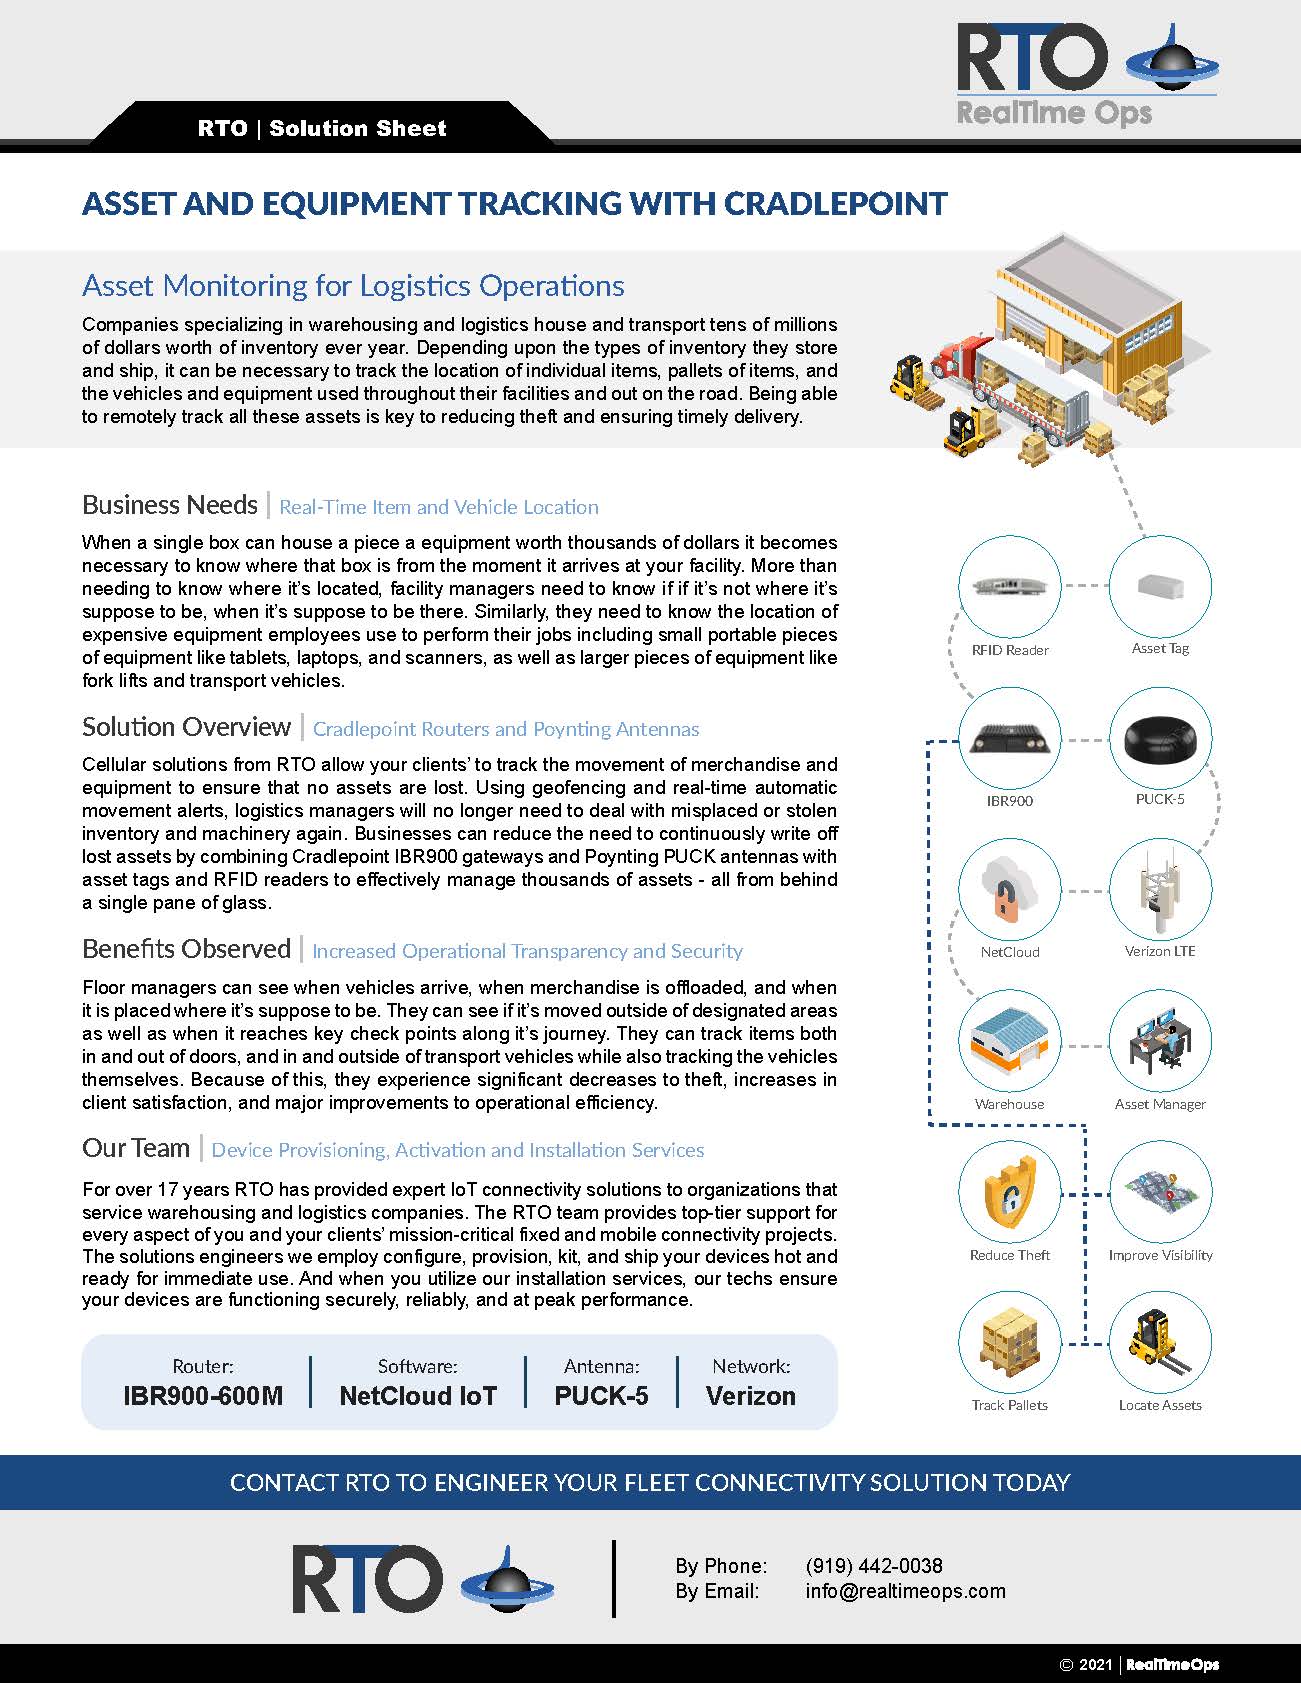 Asset and Equipment Tracking Solutions